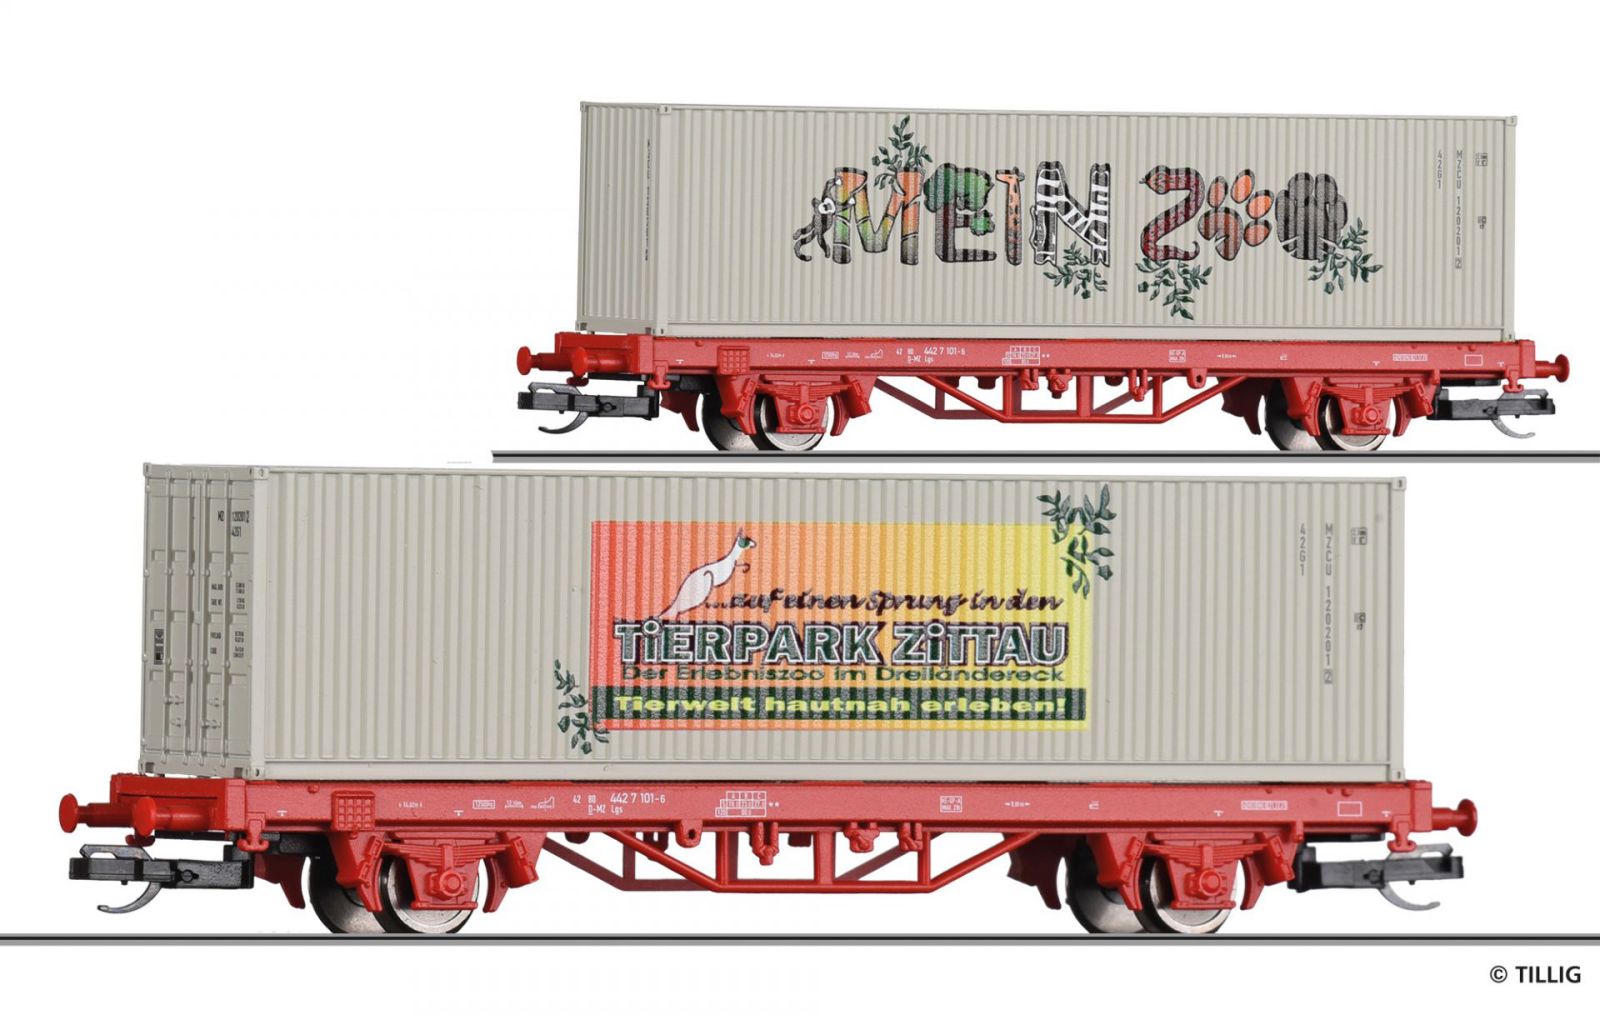 START-Container car “Mein Zoo”